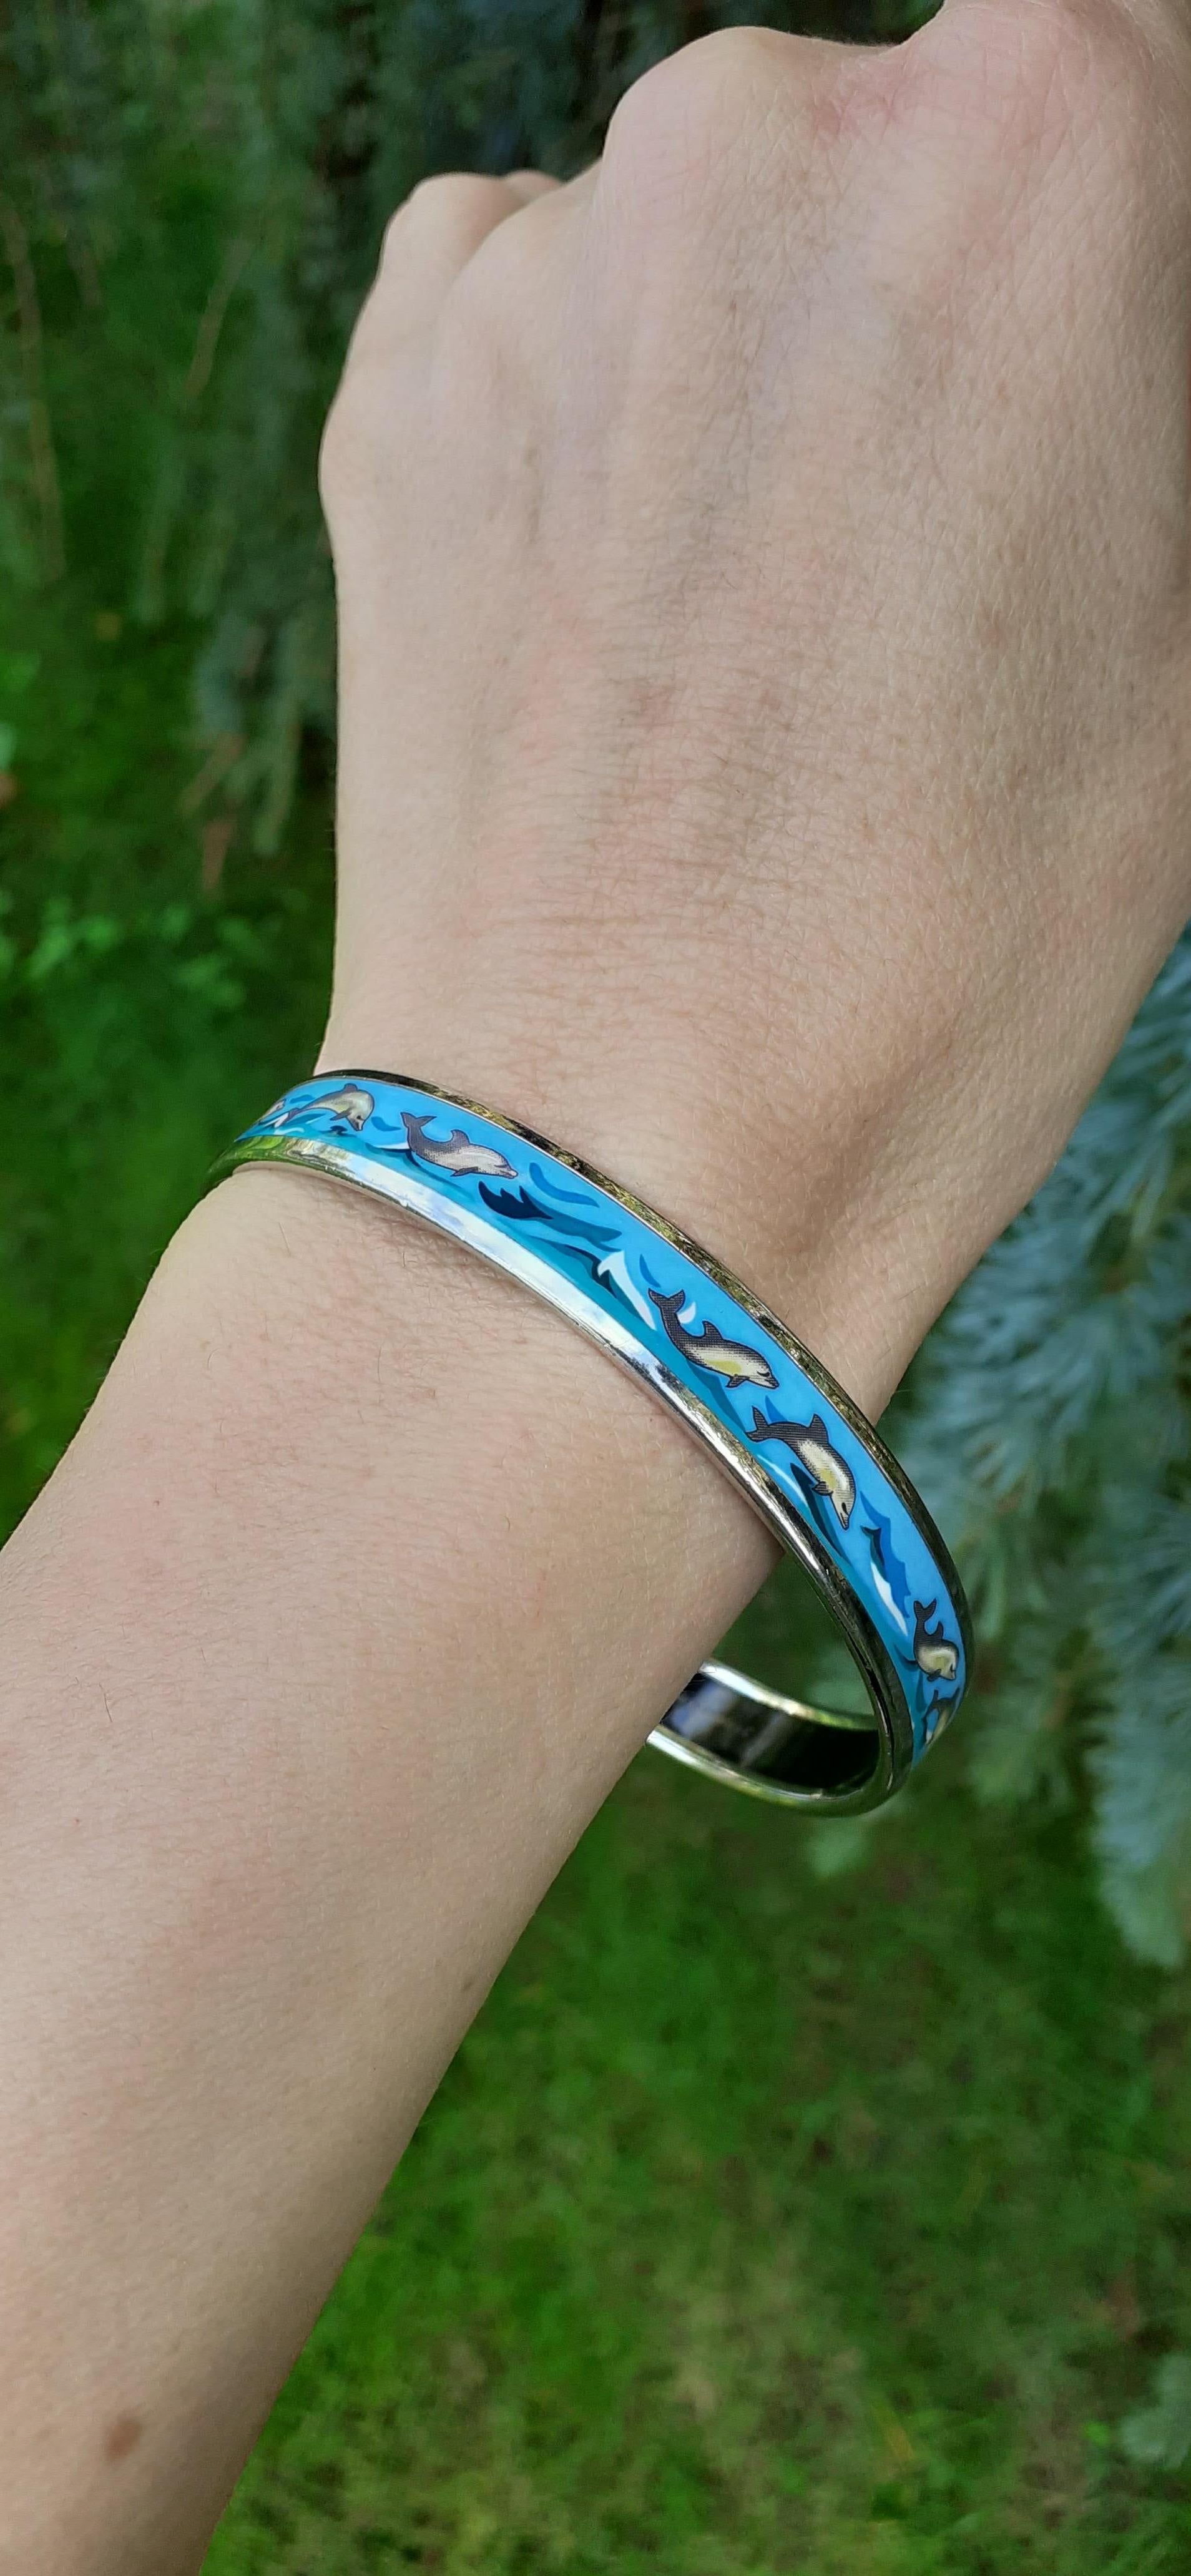 Beautiful Authentic Hermès Bracelet

Pattern: Dolphins in See

RARE bracelet, hard to find !

Made in Austria + C

Made of Enamel and Palladium Plated Hardware (Silver-tone)

Colorways: Blue, Grey, Green, White

